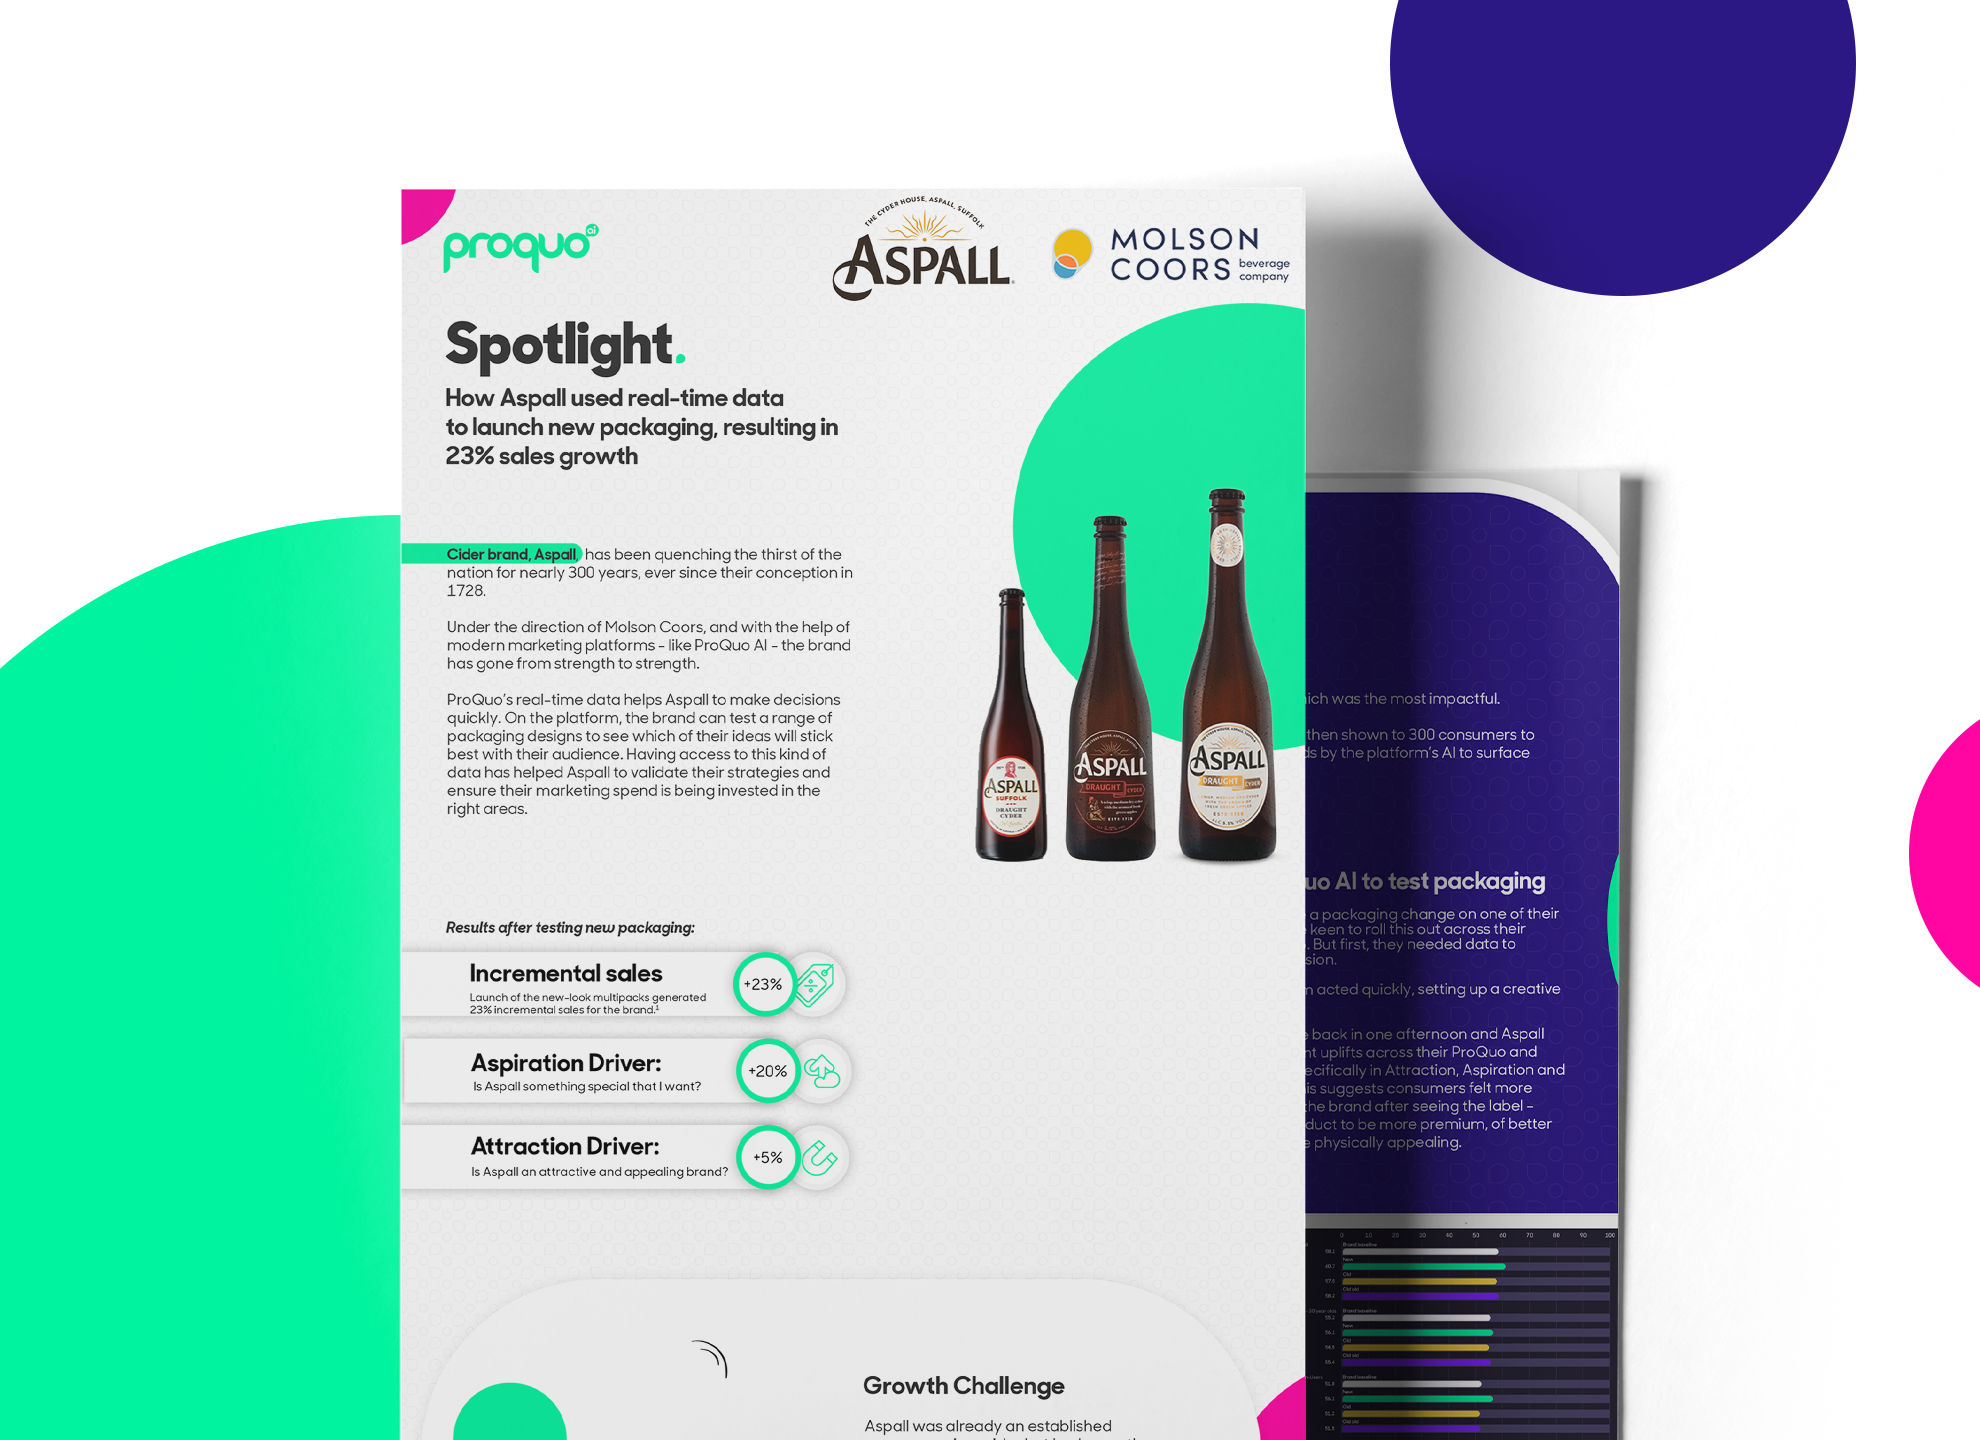 Case Study: Aspall uses real-time data to drive sales growth 